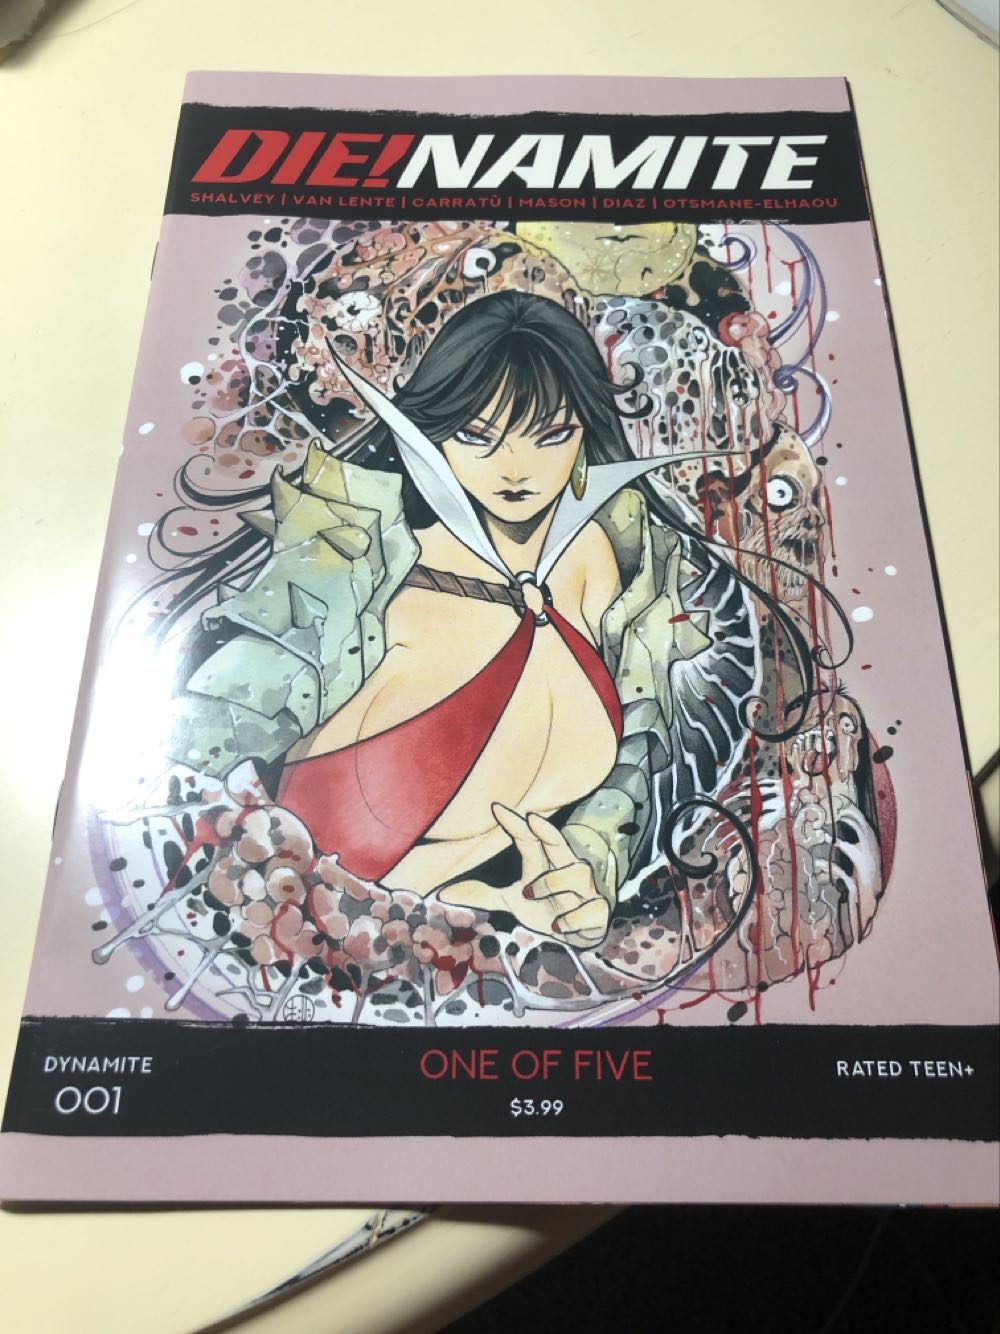 Die!namite - Dynamite (1) comic book collectible [Barcode 72513029578101031] - Main Image 1